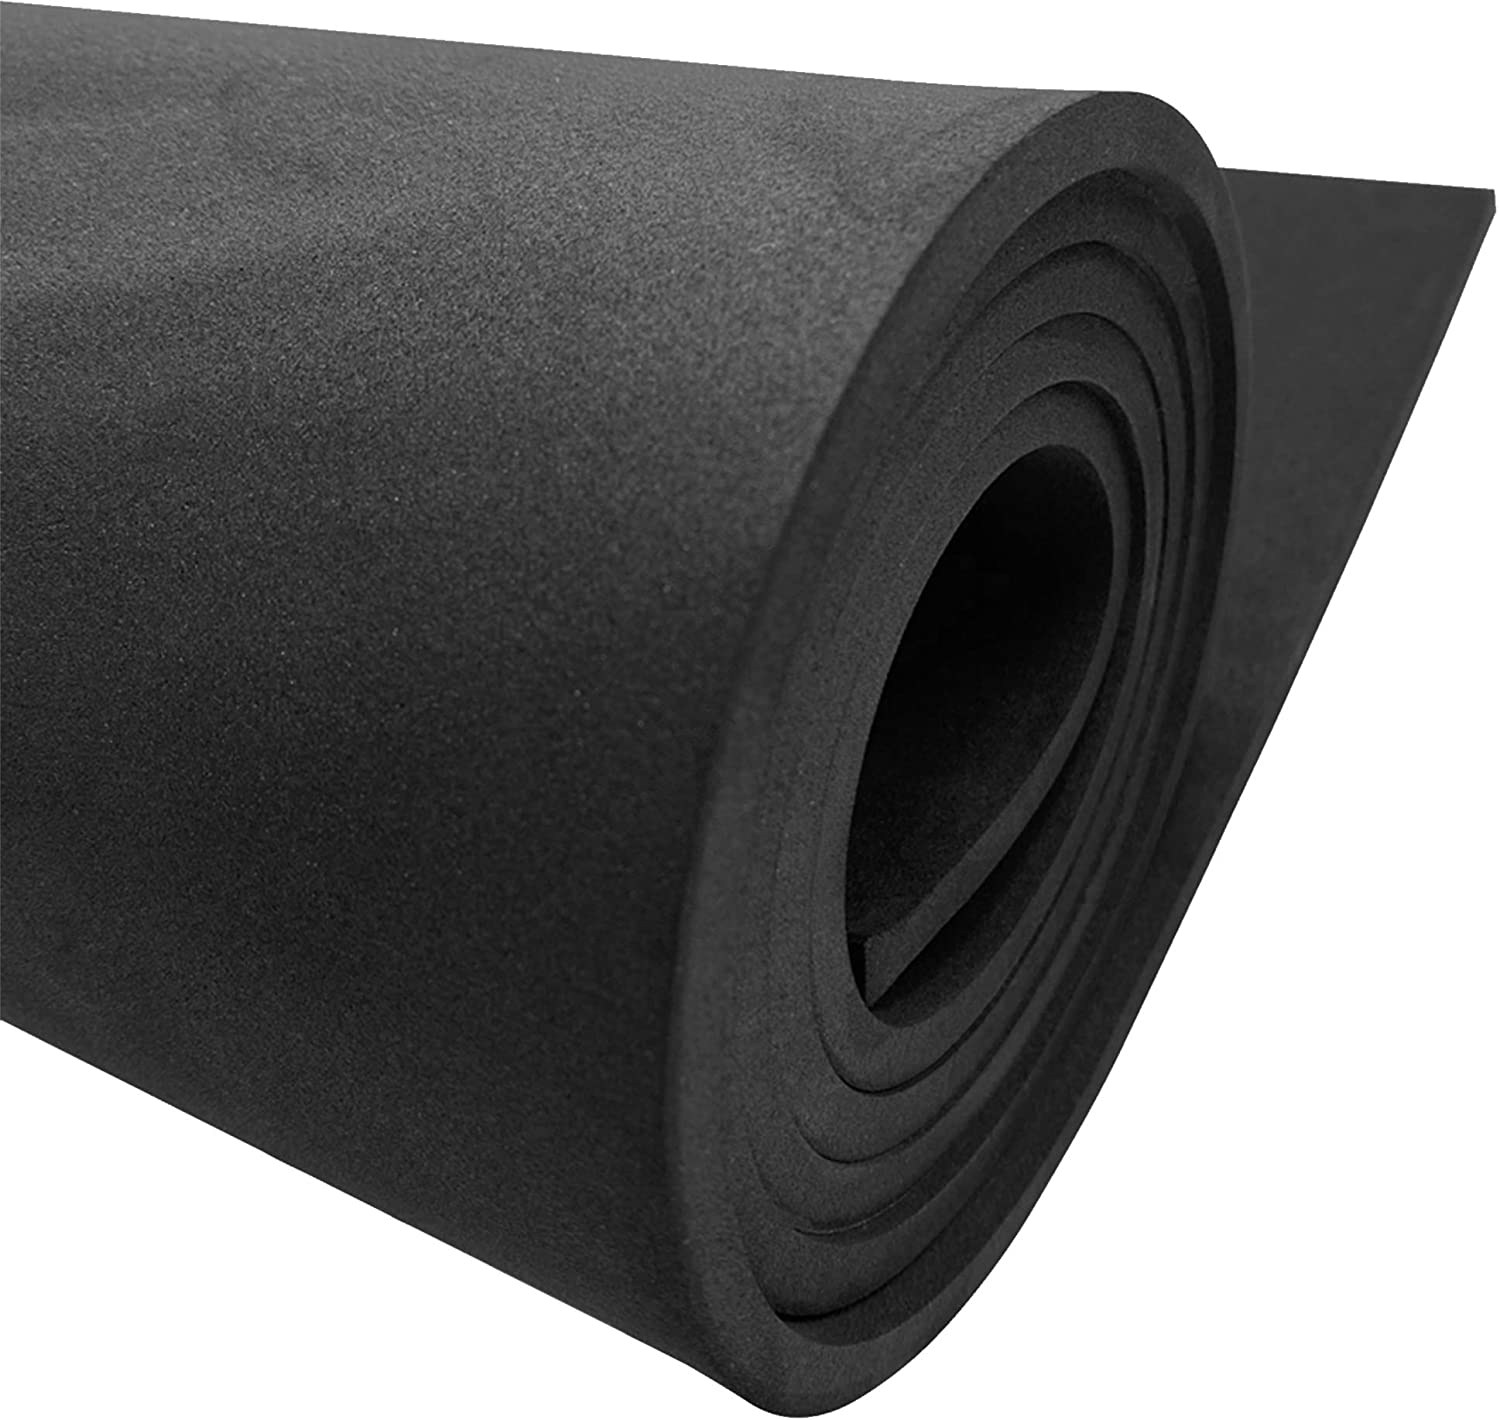 EVA Foam sheets 2 mm CF65 Low Density for Cosplay, Theatre and TV